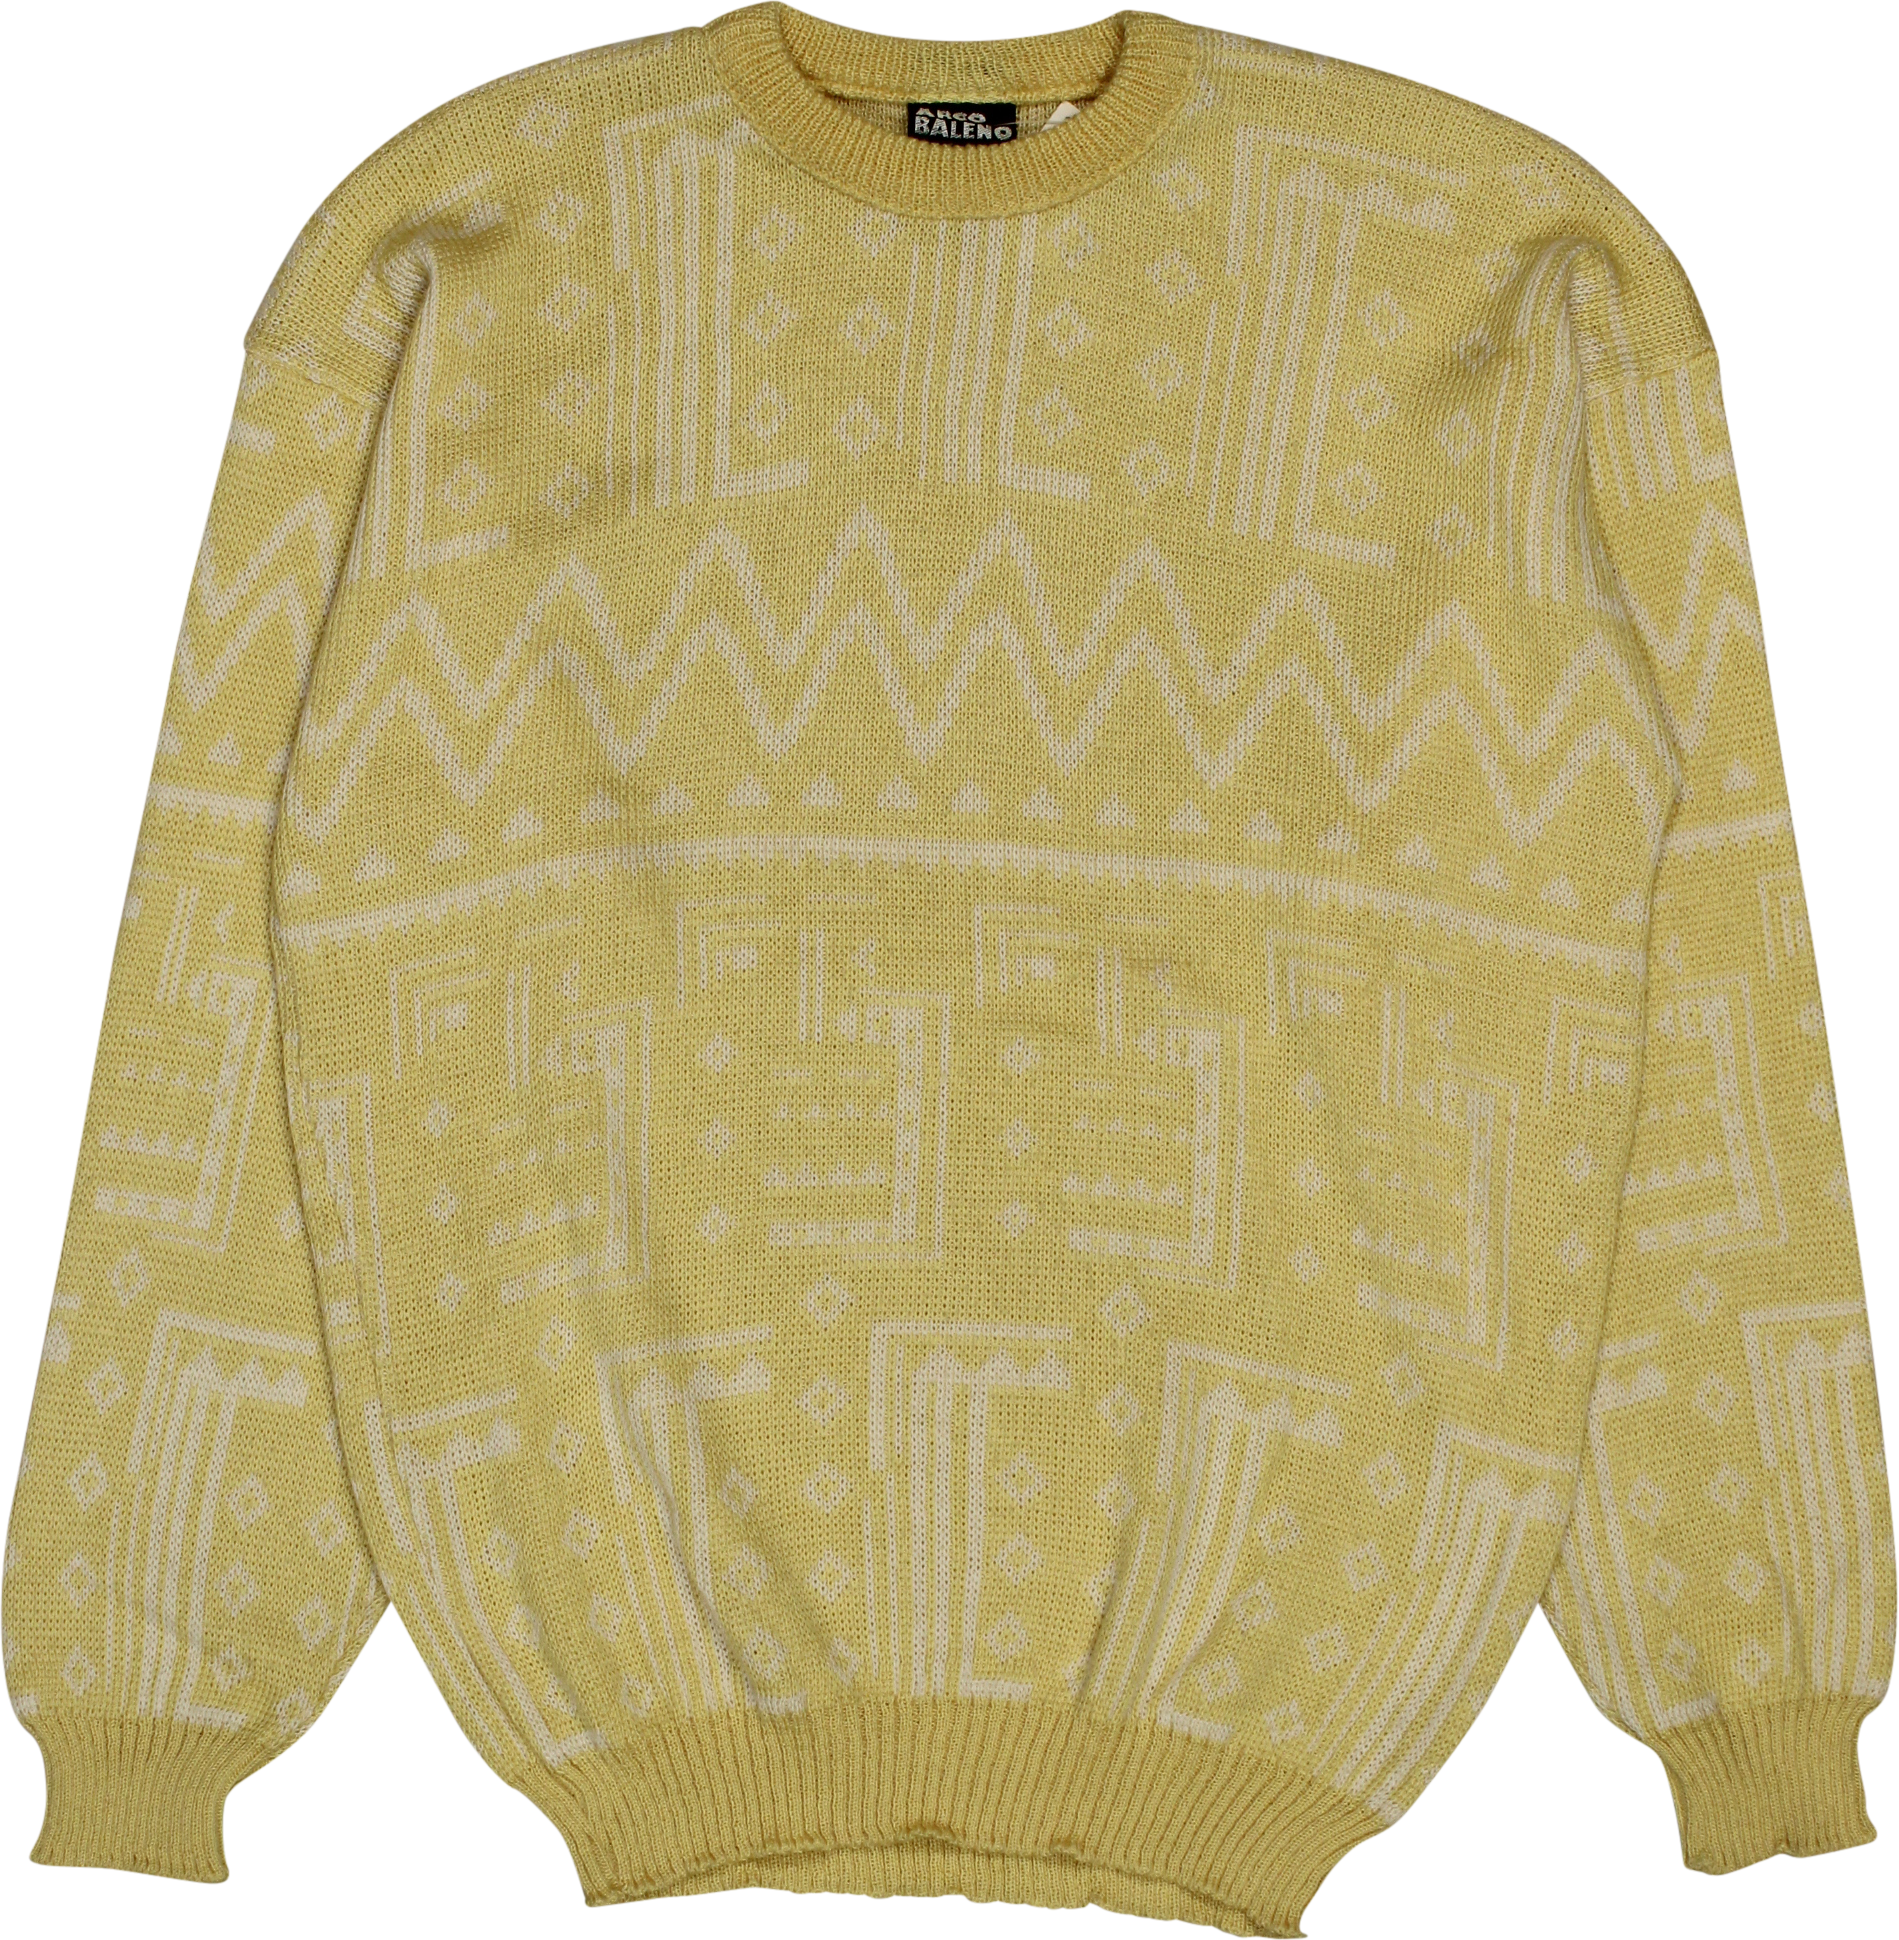 Arco Baleno - 80s Jumper- ThriftTale.com - Vintage and second handclothing